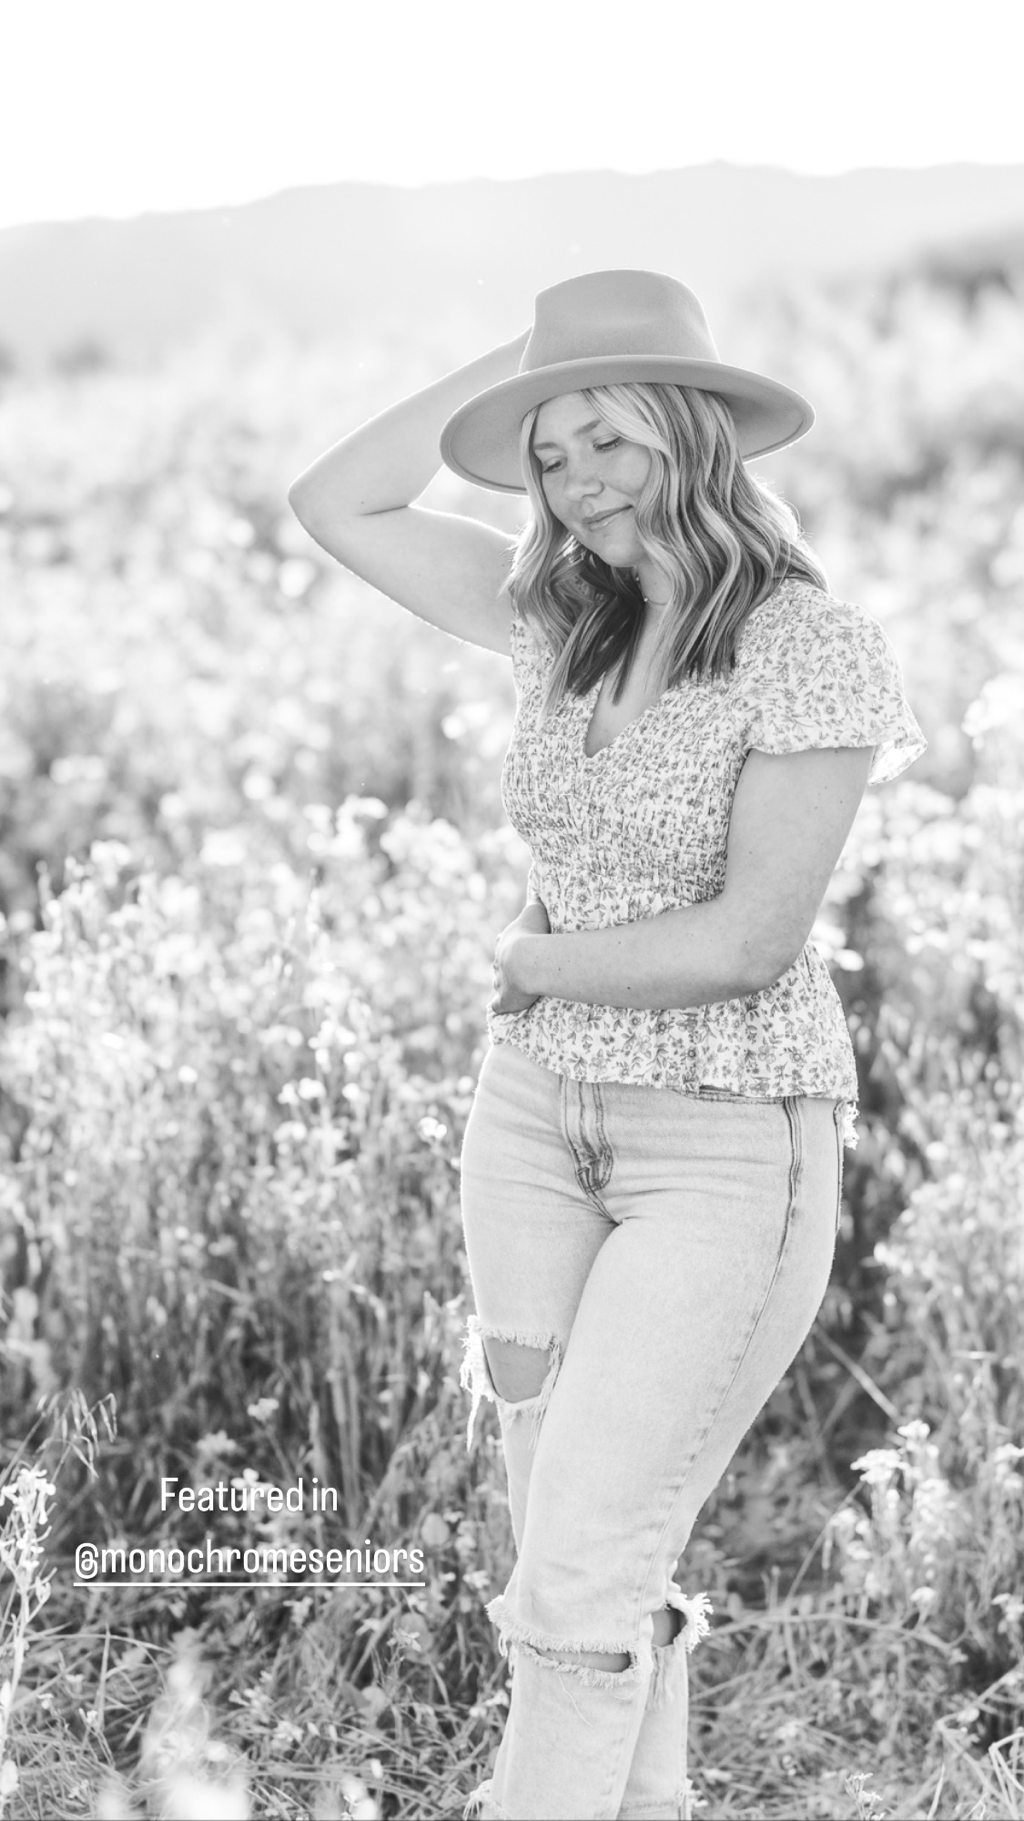 teenage girl with long blond wearing a hat and jeans in a flower field